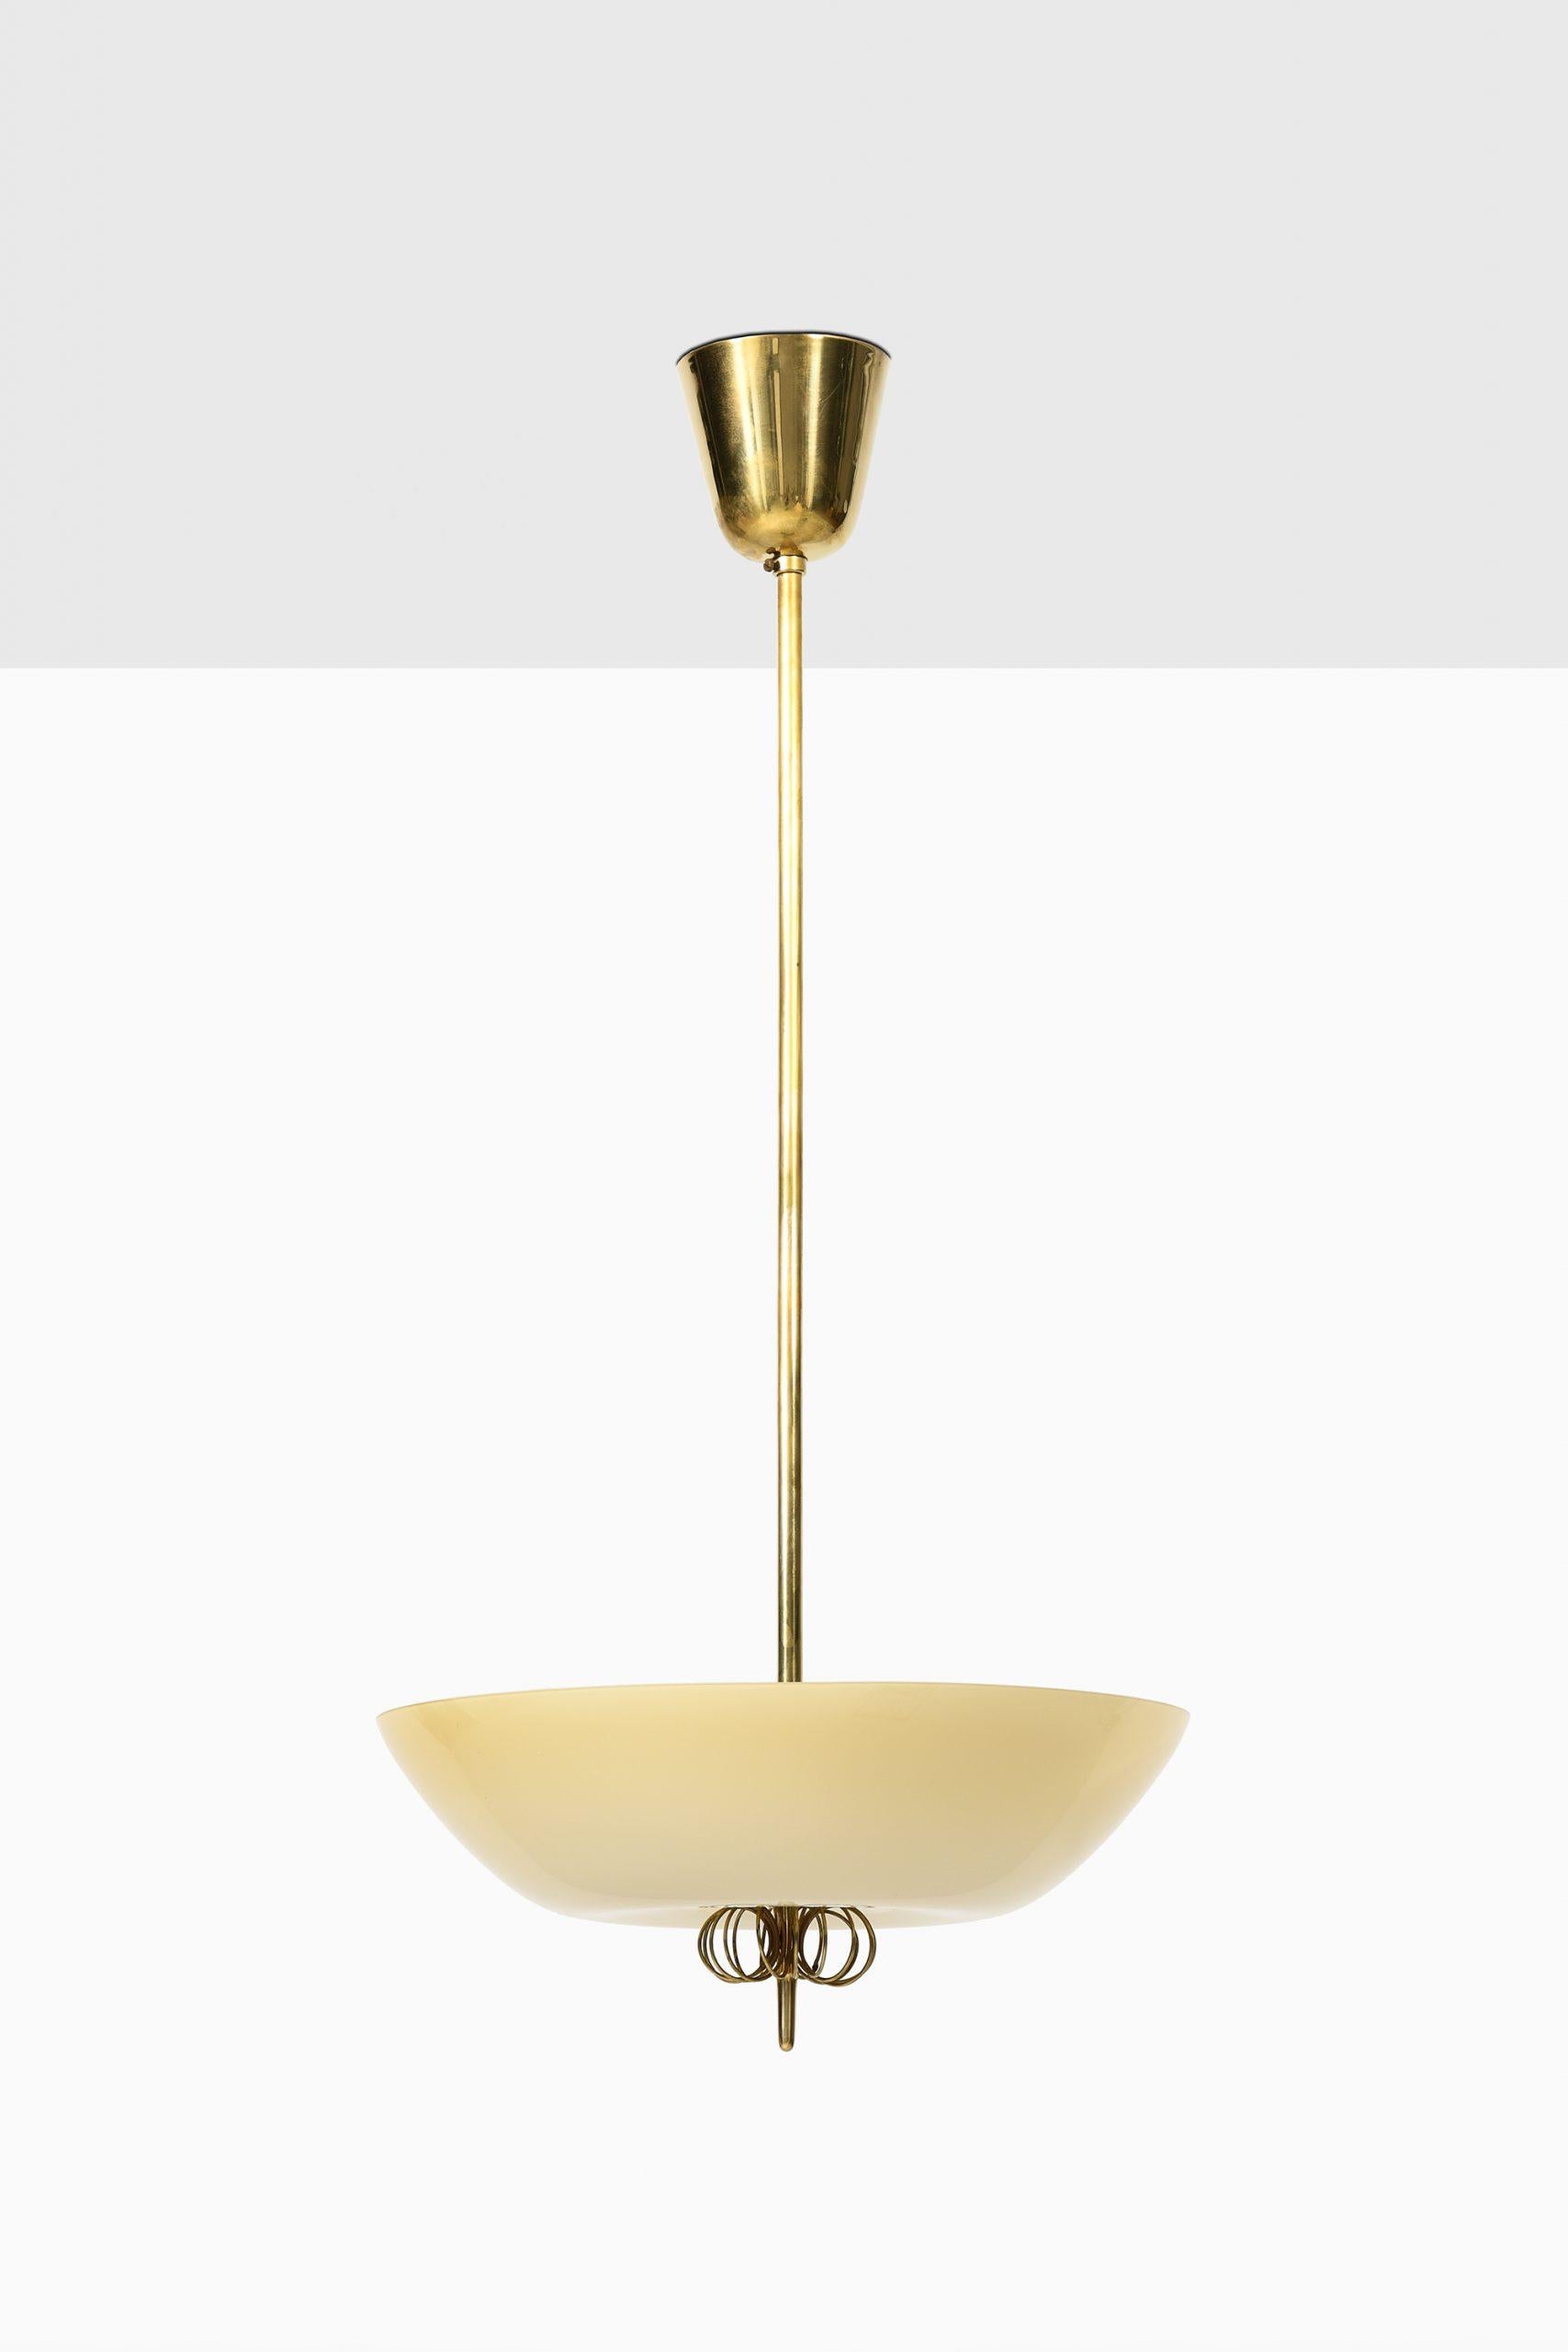 Rare ceiling lamps designed by Paavo Tynell. Produced by Taito Oy in Finland.